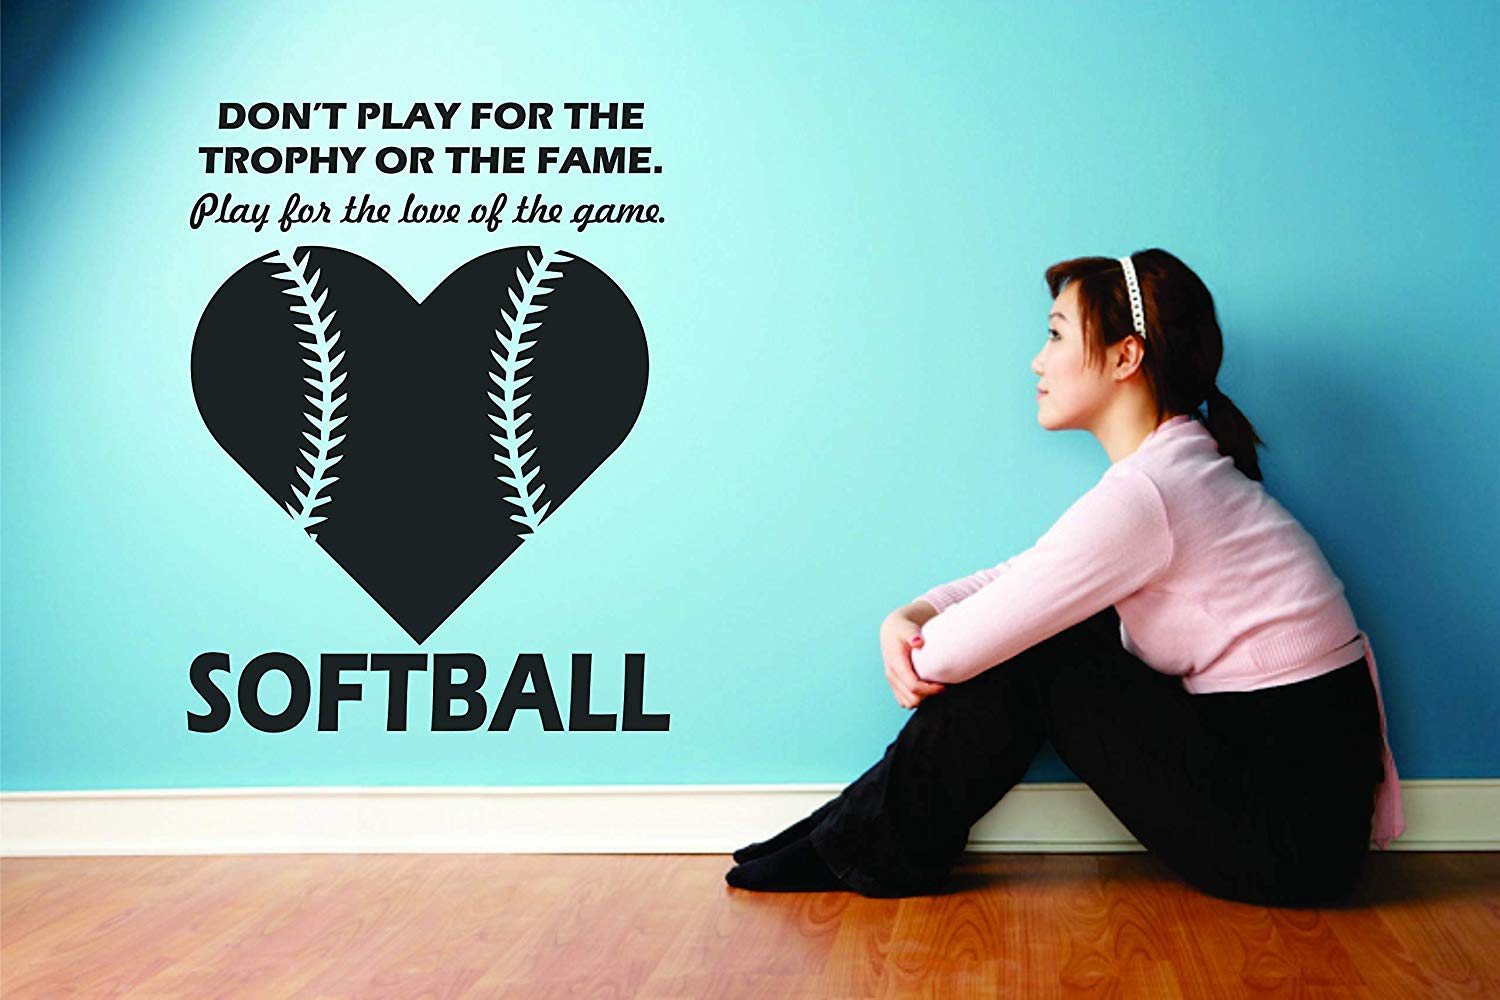 5 Inspiring Softball Quotes to Fuel Your Passion